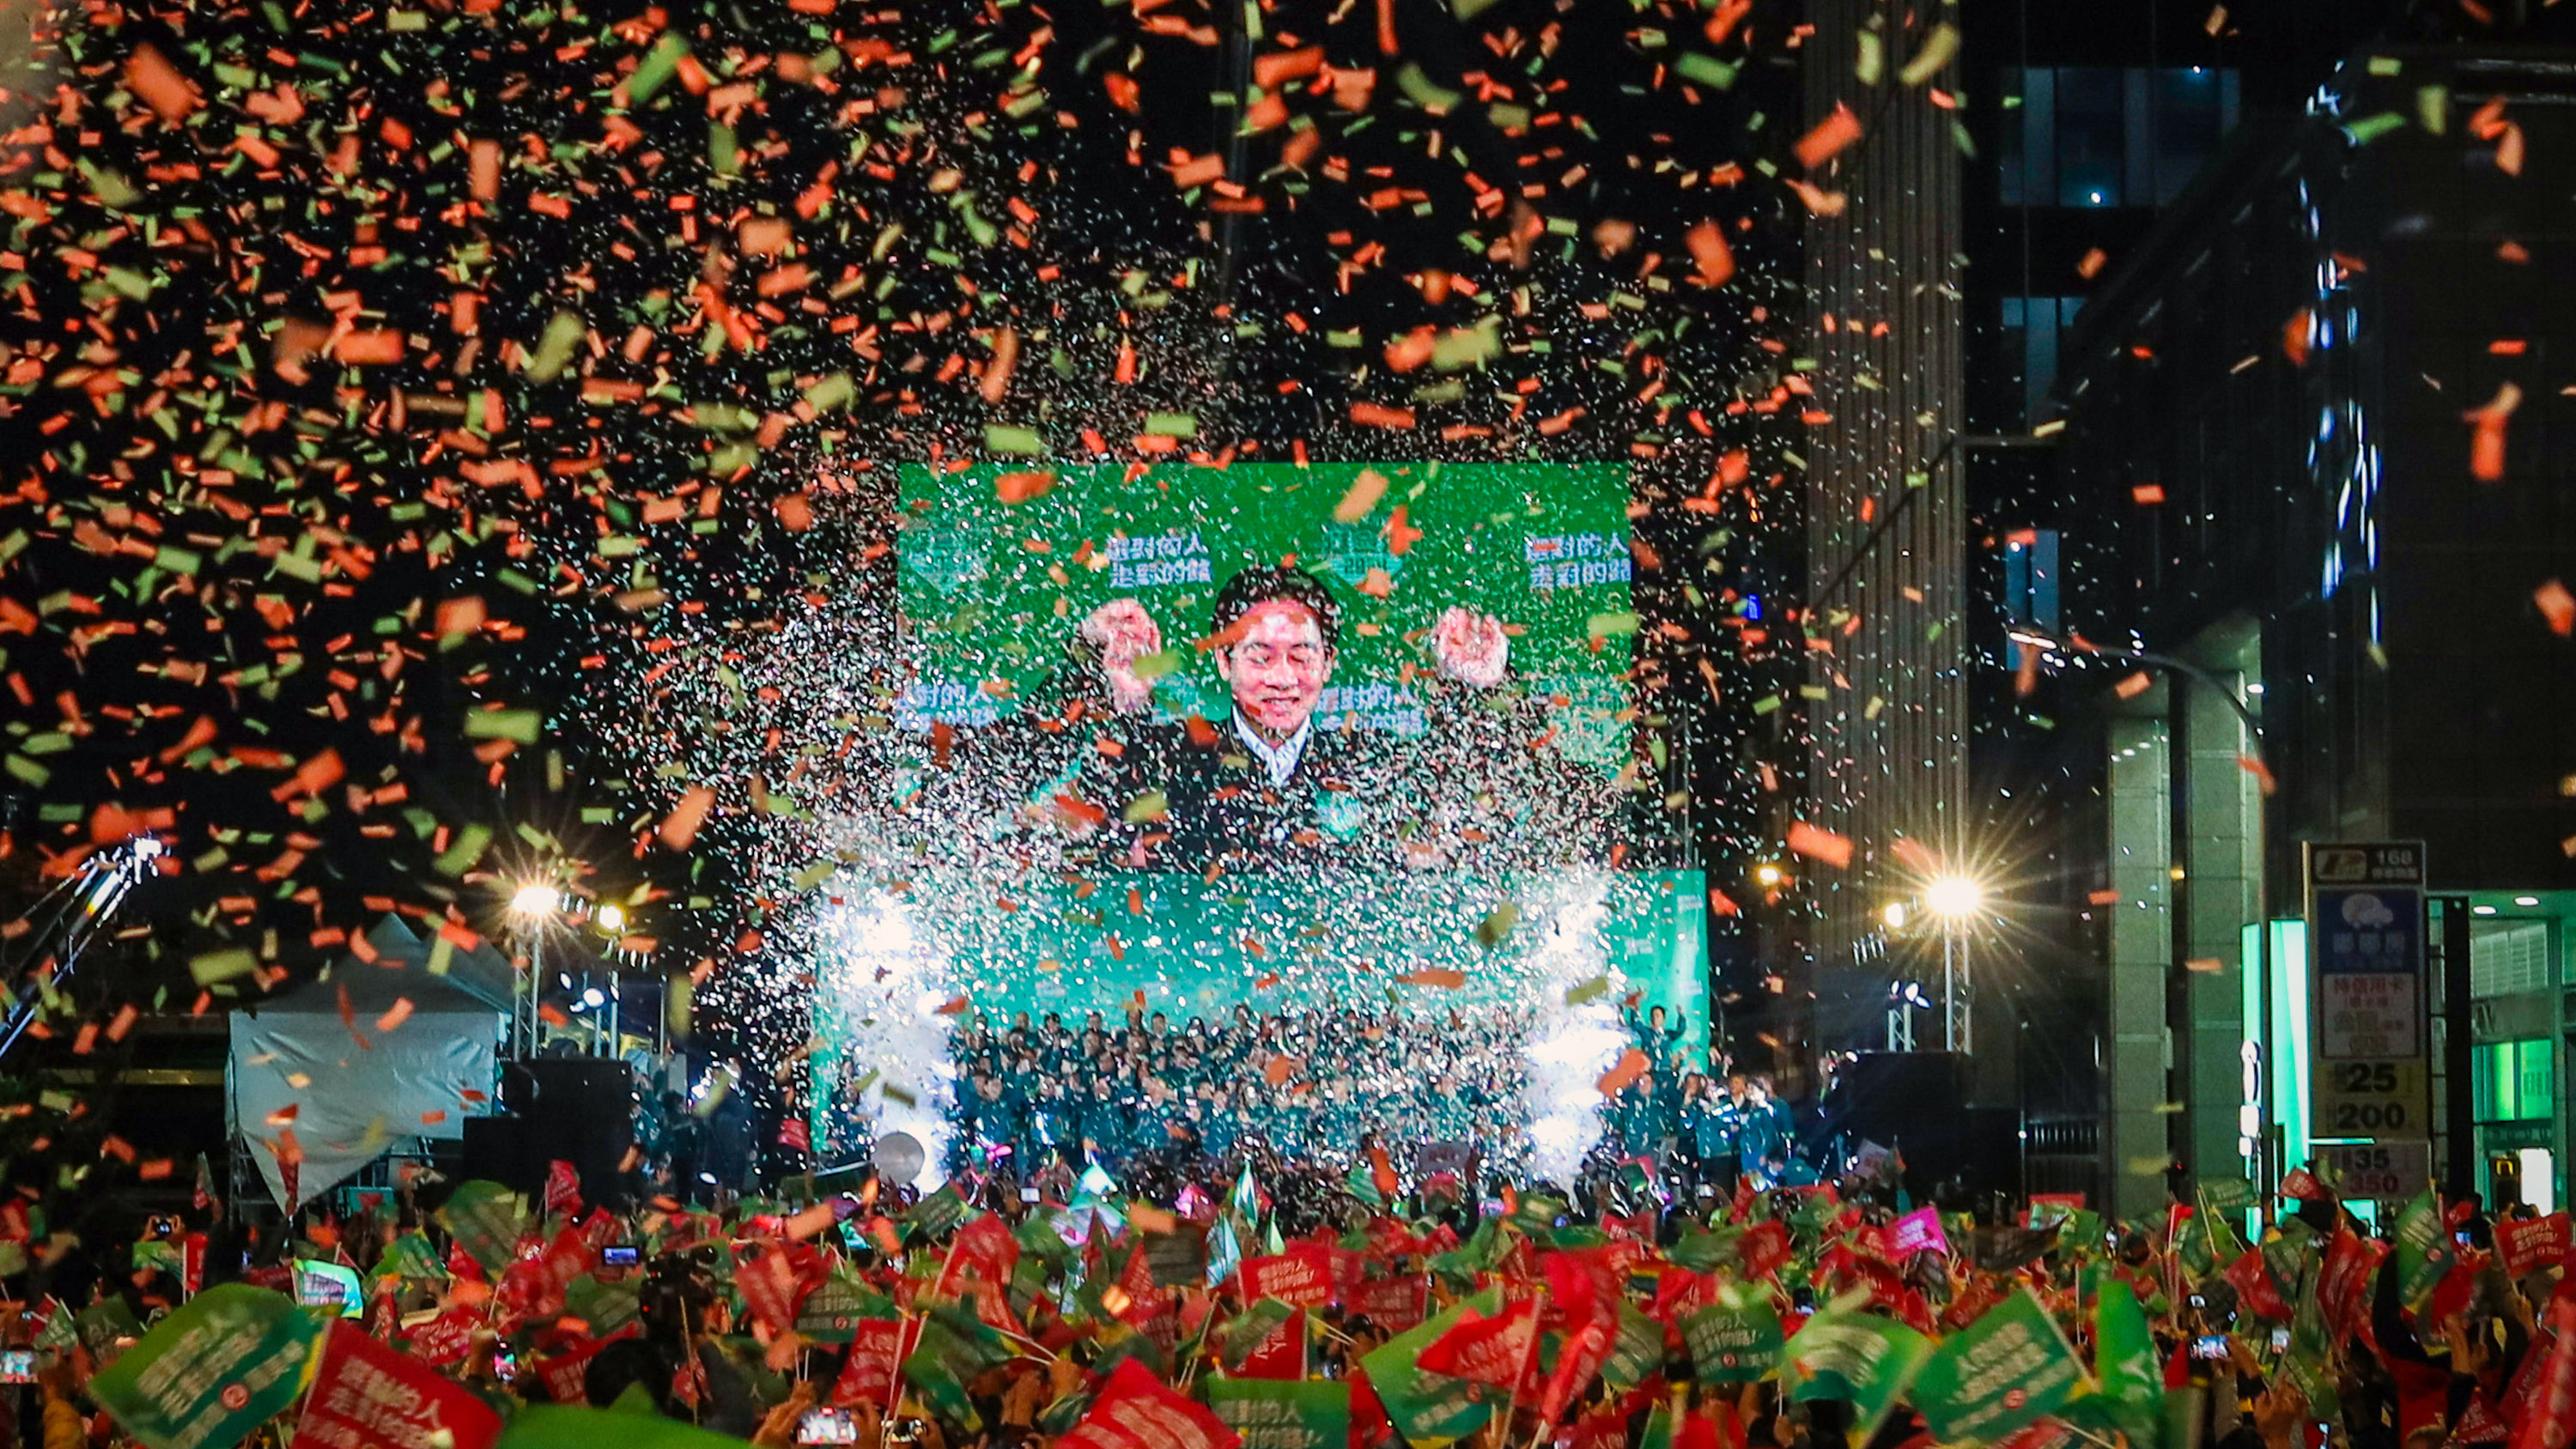 Confetti flies over the stage and crowd at night with president-elect Lai Ching-te on the big screen in the center